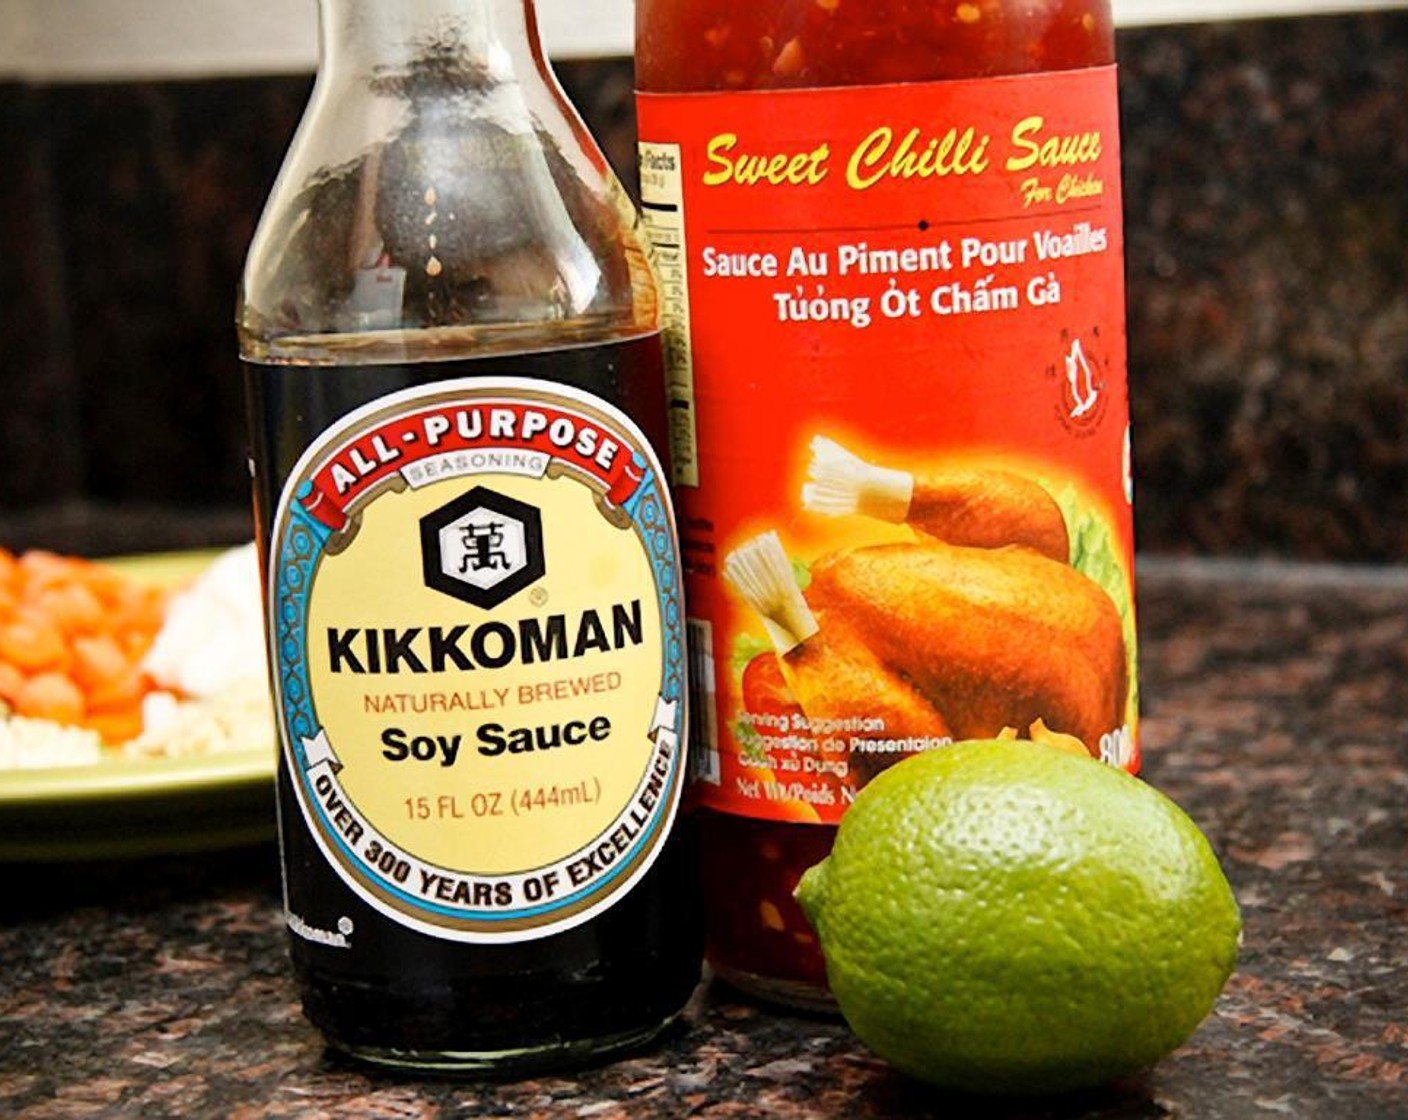 step 1 In a small bowl, mix the Soy Sauce (2 Tbsp), Sweet Chili Sauce (3 Tbsp), juice of the Lime (1) and salt and pepper.